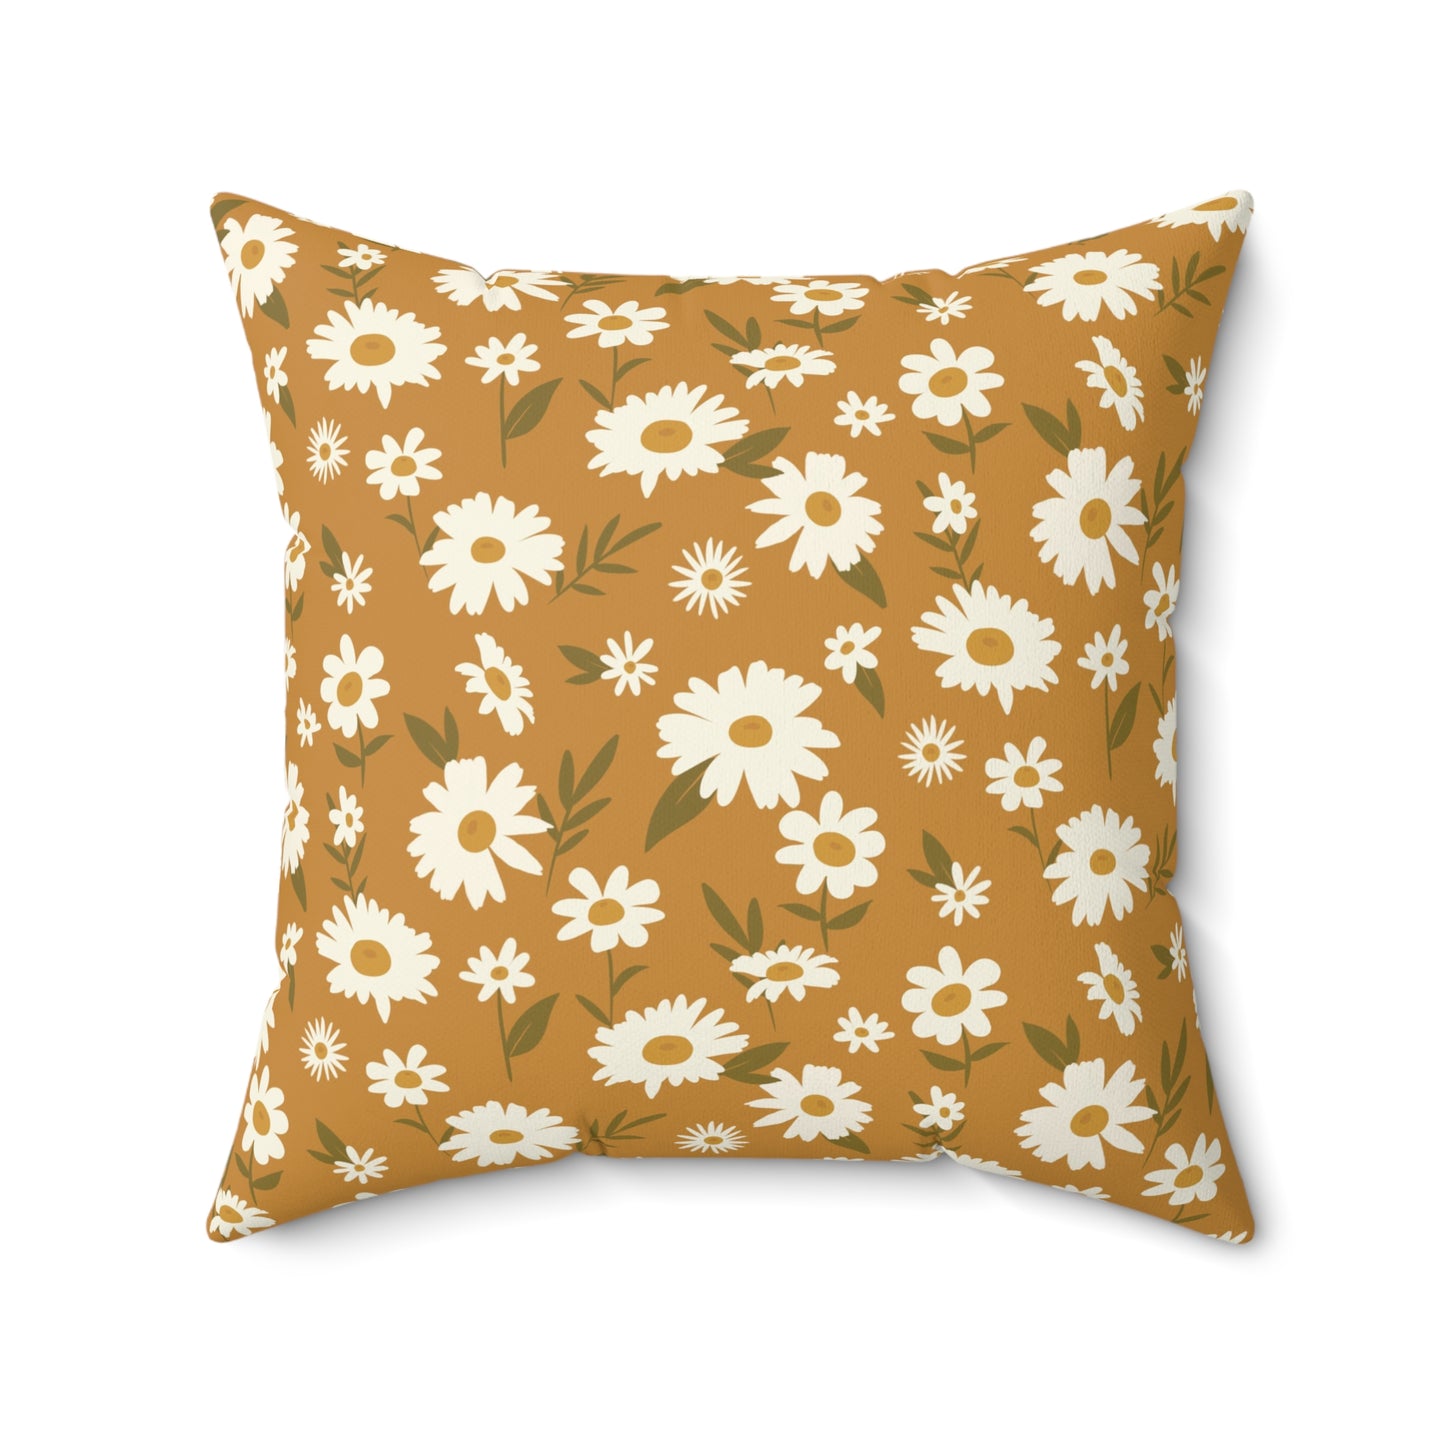 Golden Daisies Square Pillow